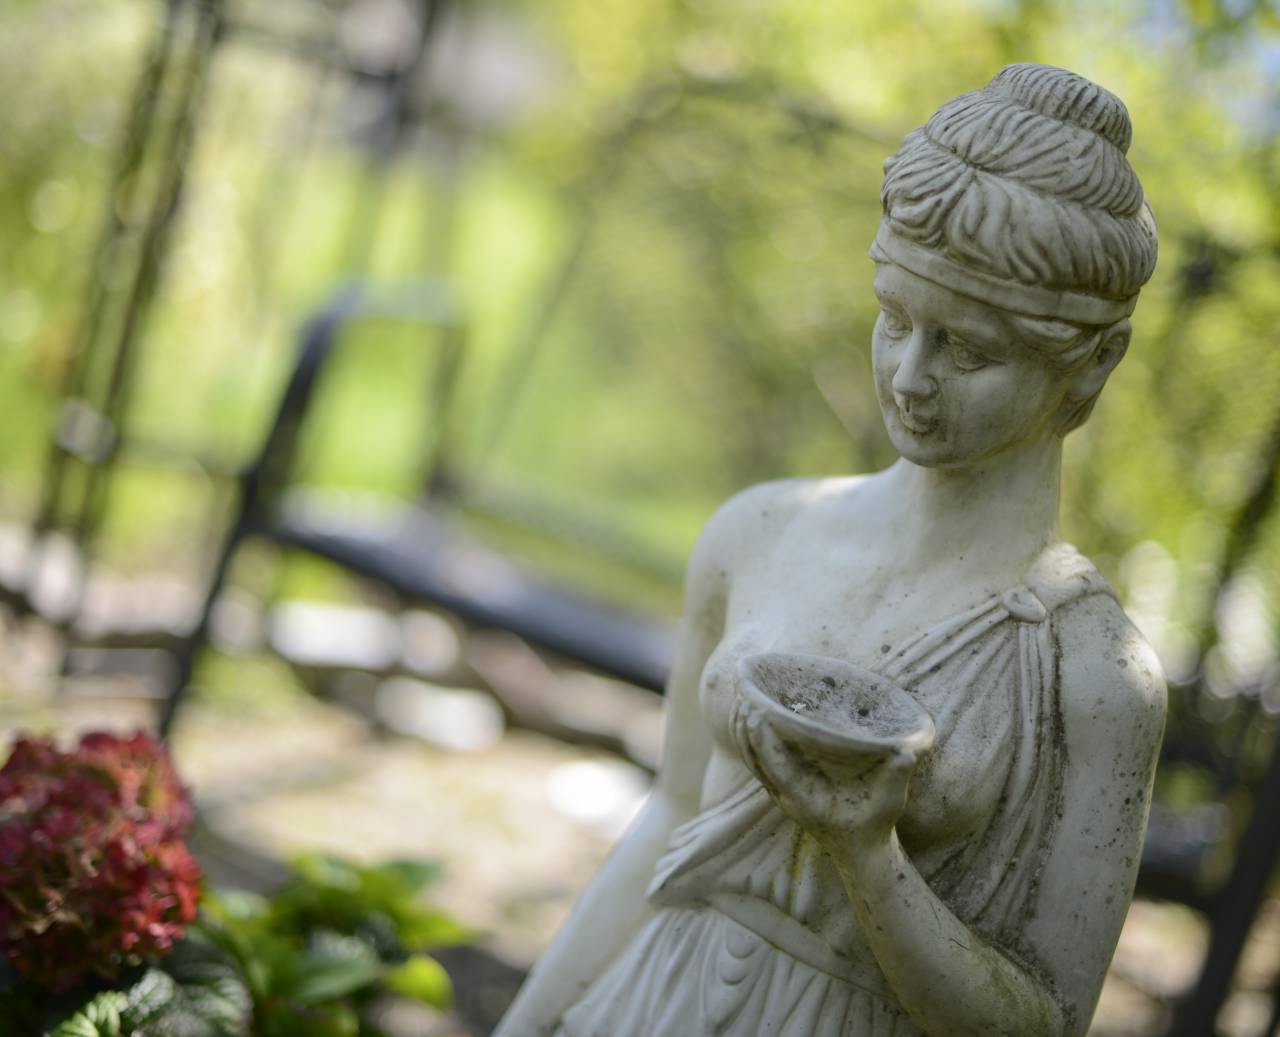 Small statue of a woman made of stone in the garden